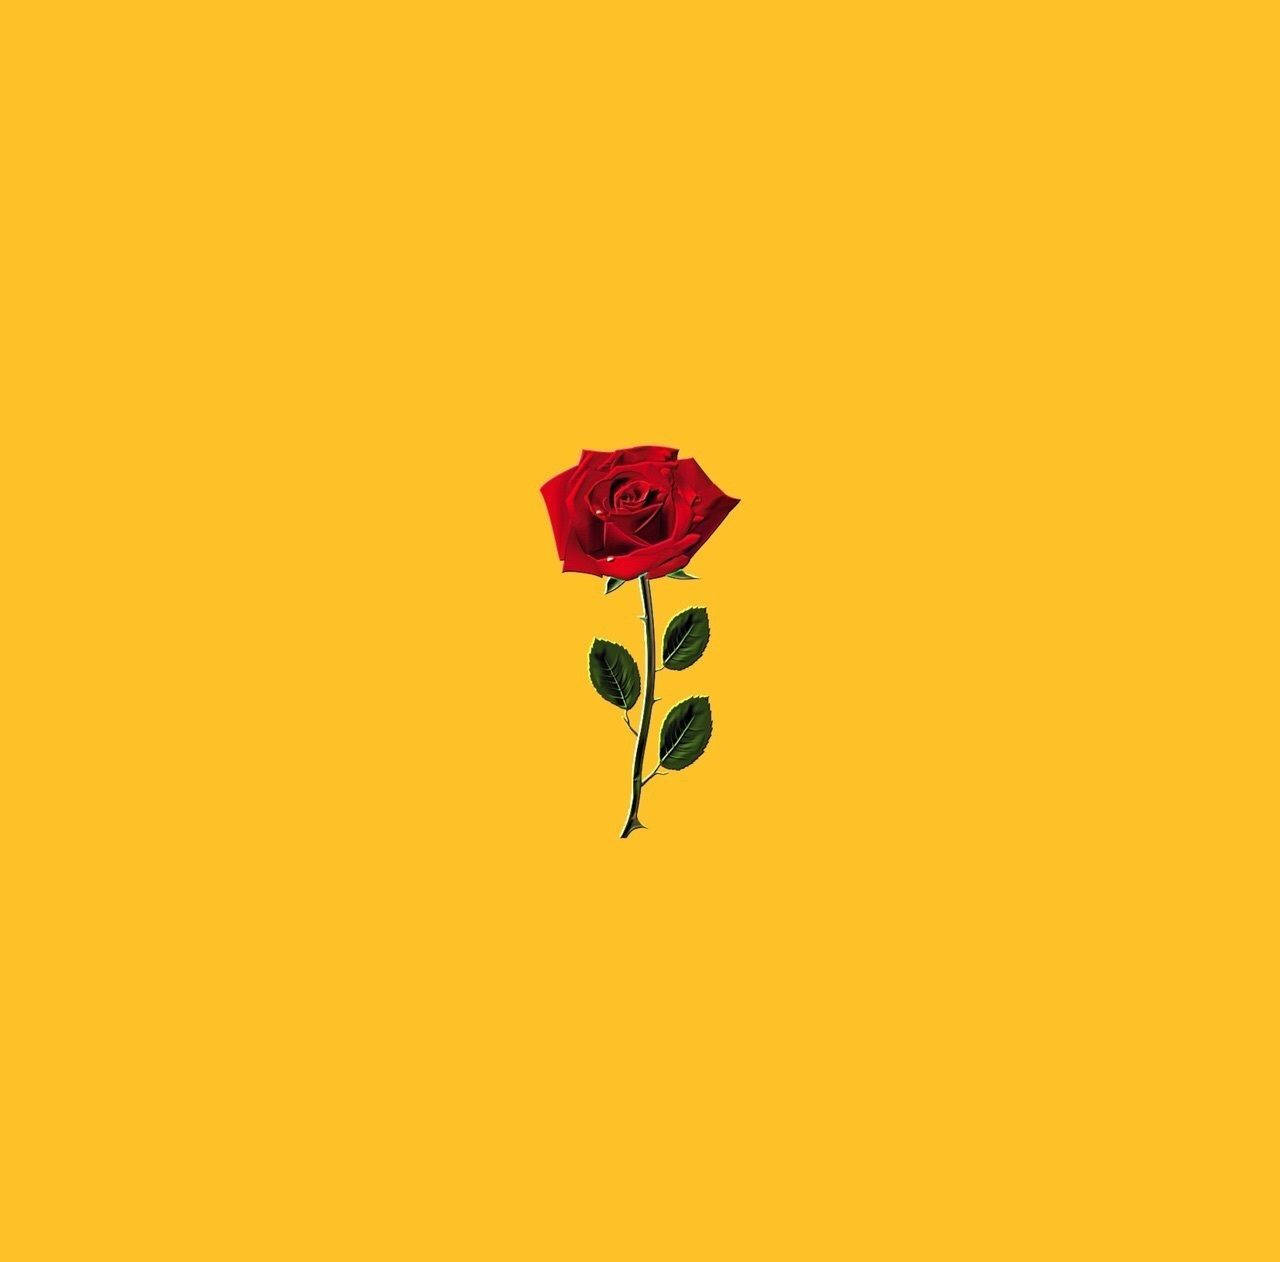 Red Rose For Cute Yellow Background